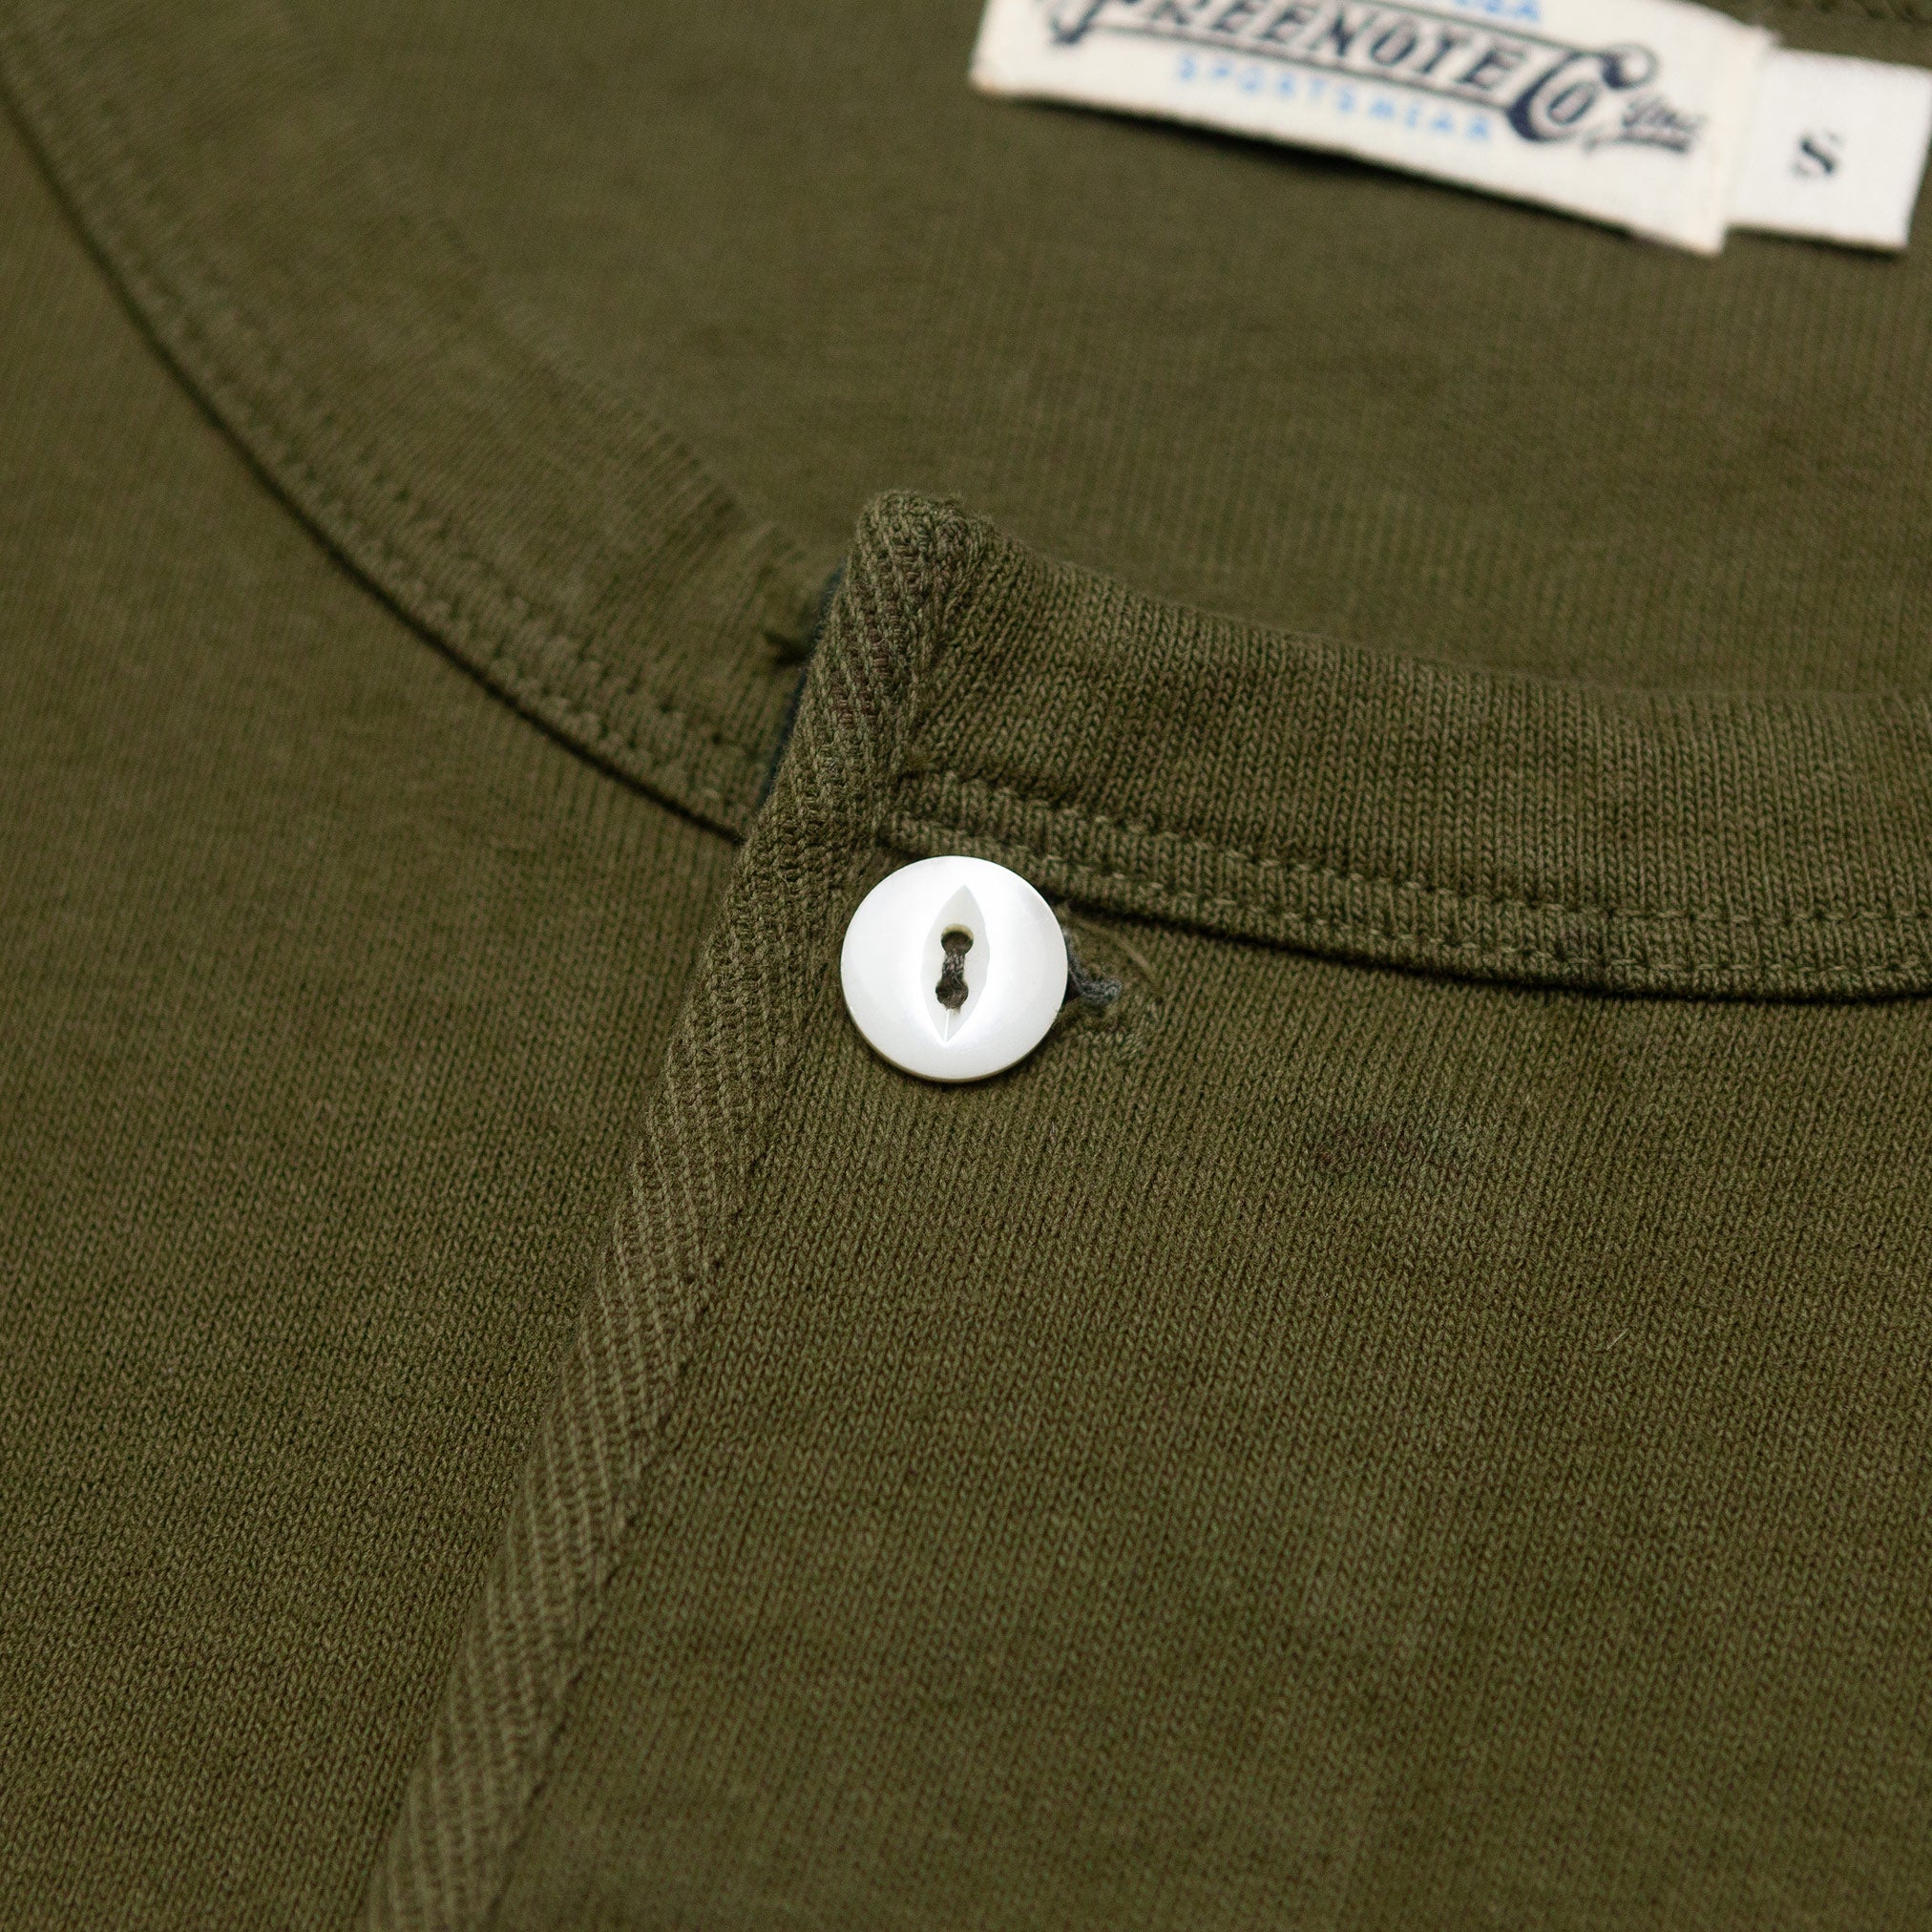 13oz Henley in Olive